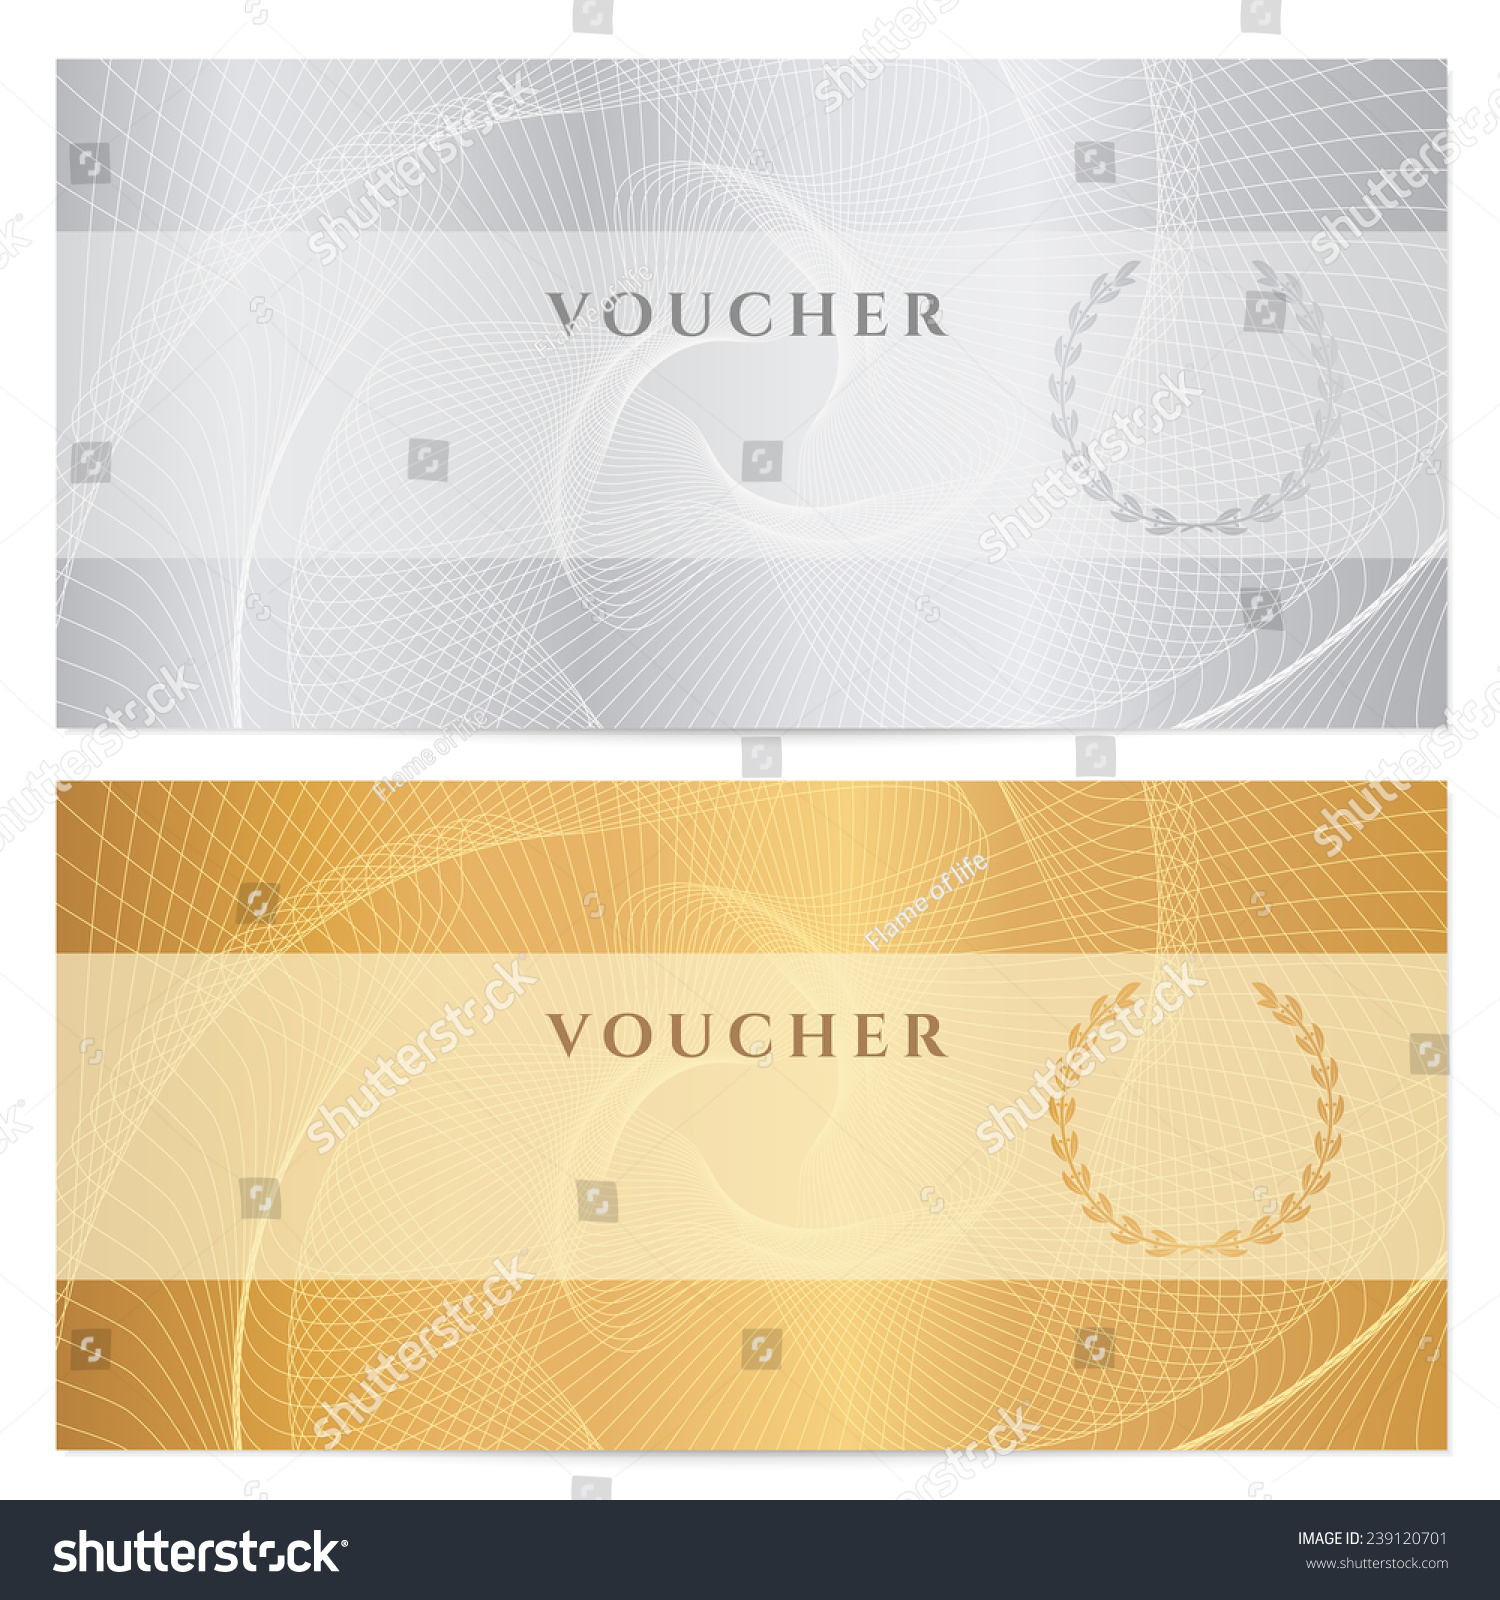 Voucher Gift Certificate Coupon Ticket Template Guilloche Pattern